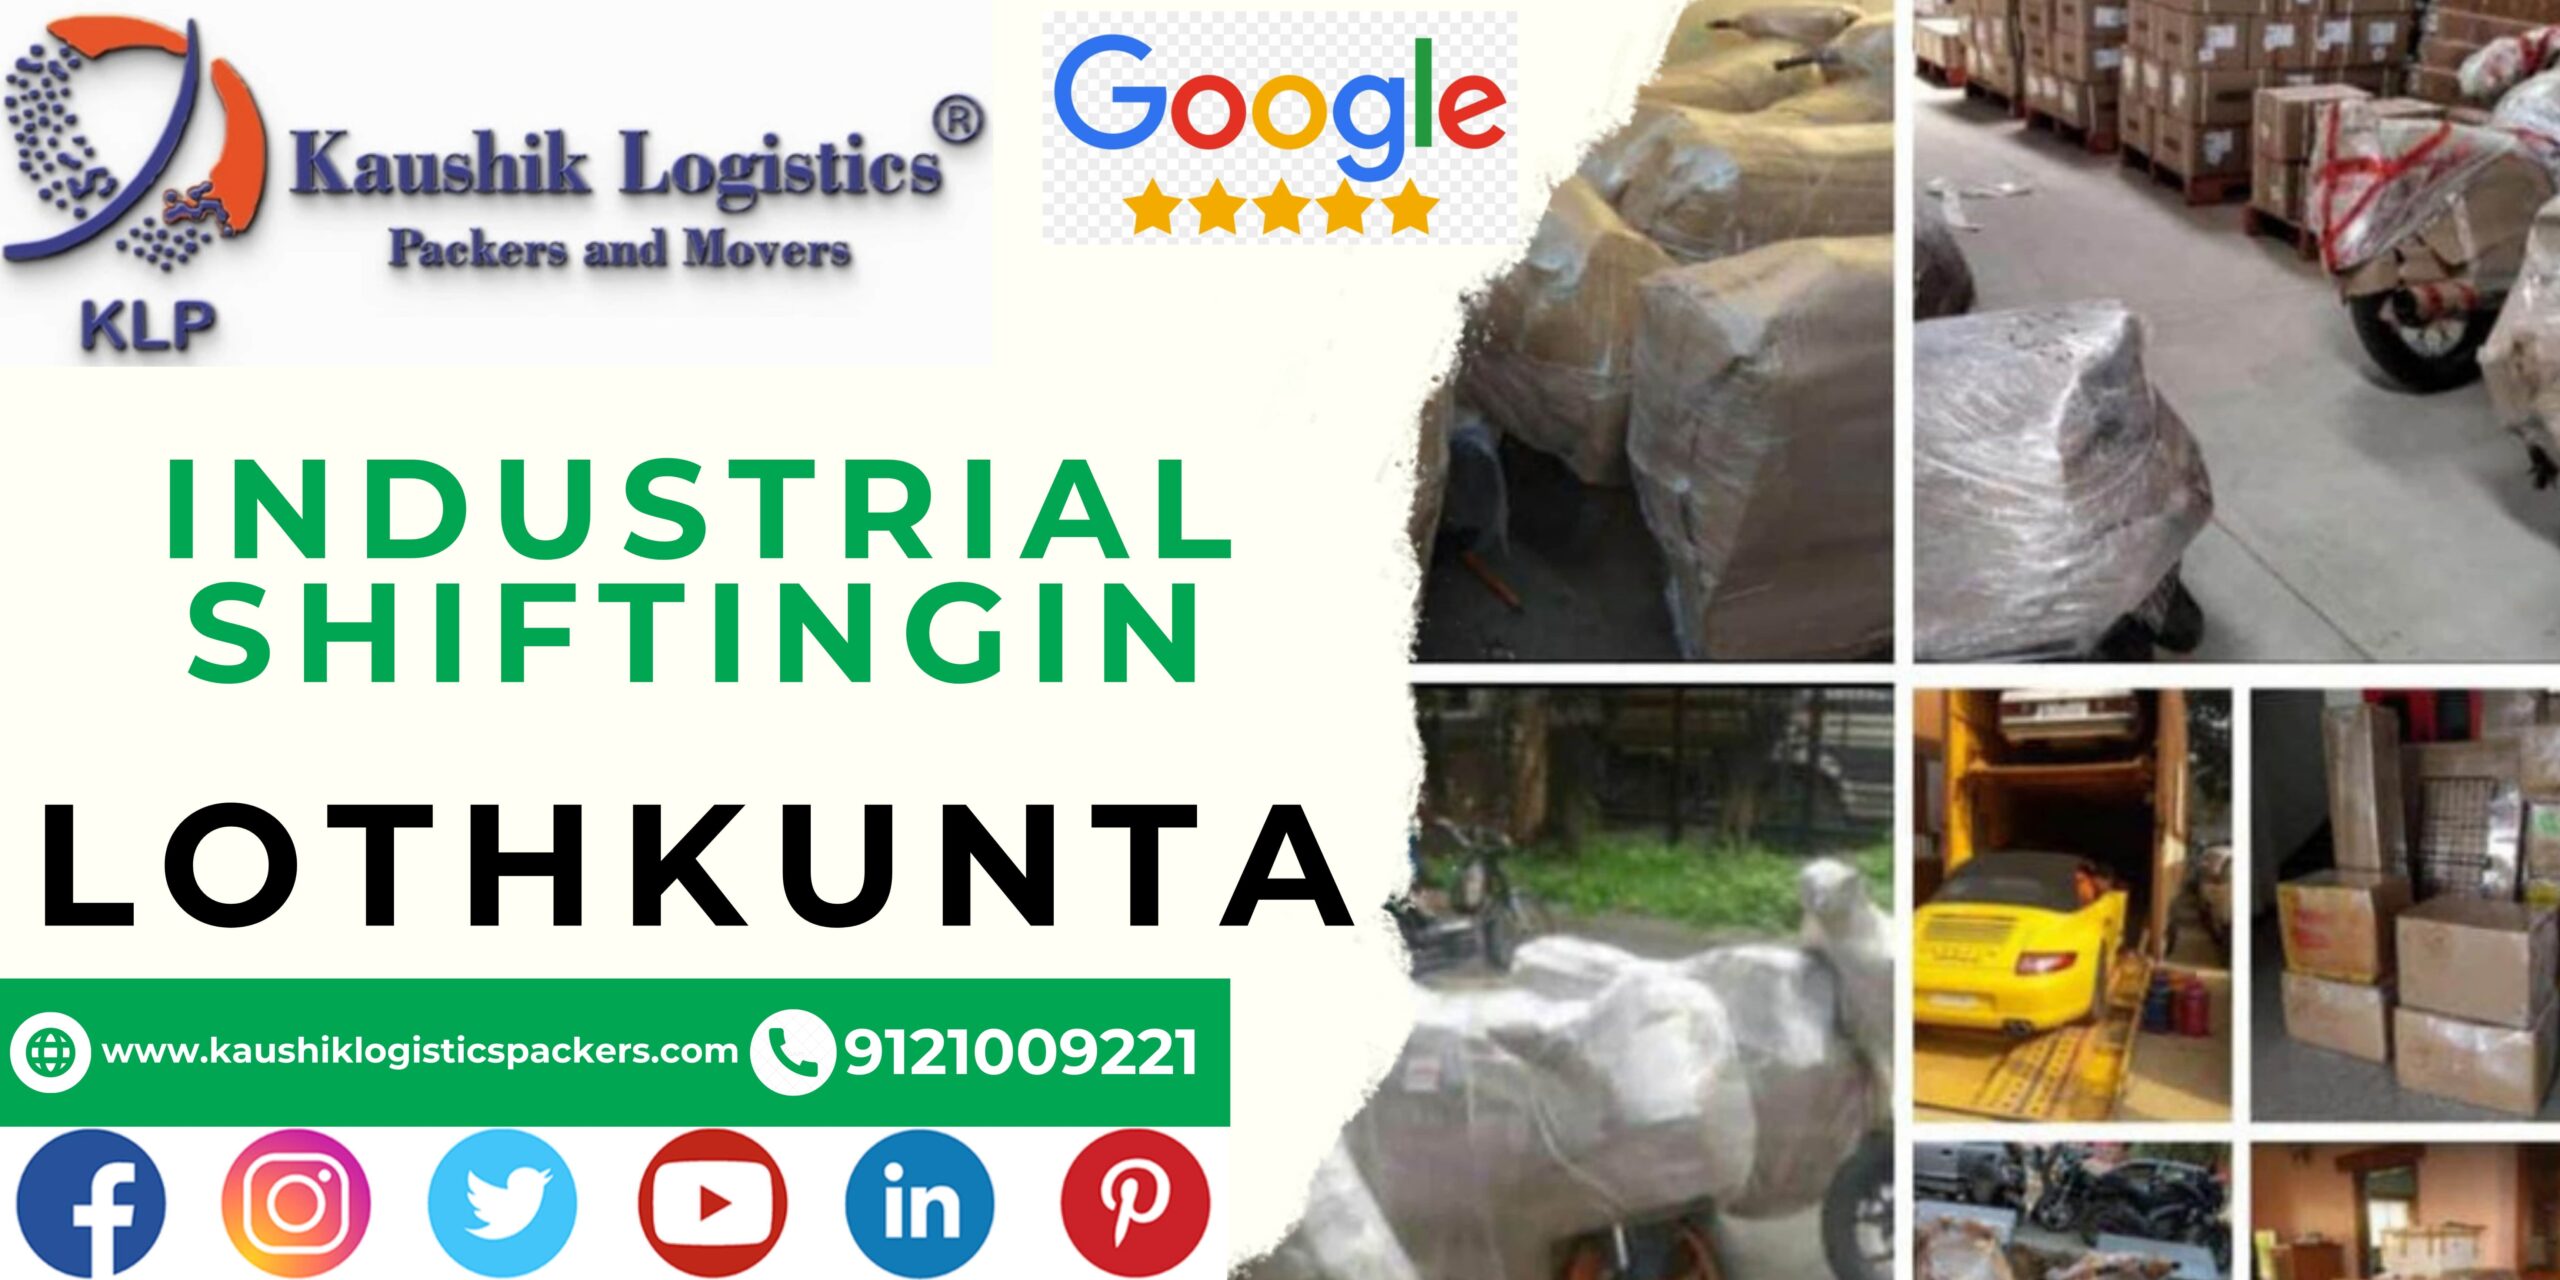 Packers and Movers In Lothkunta